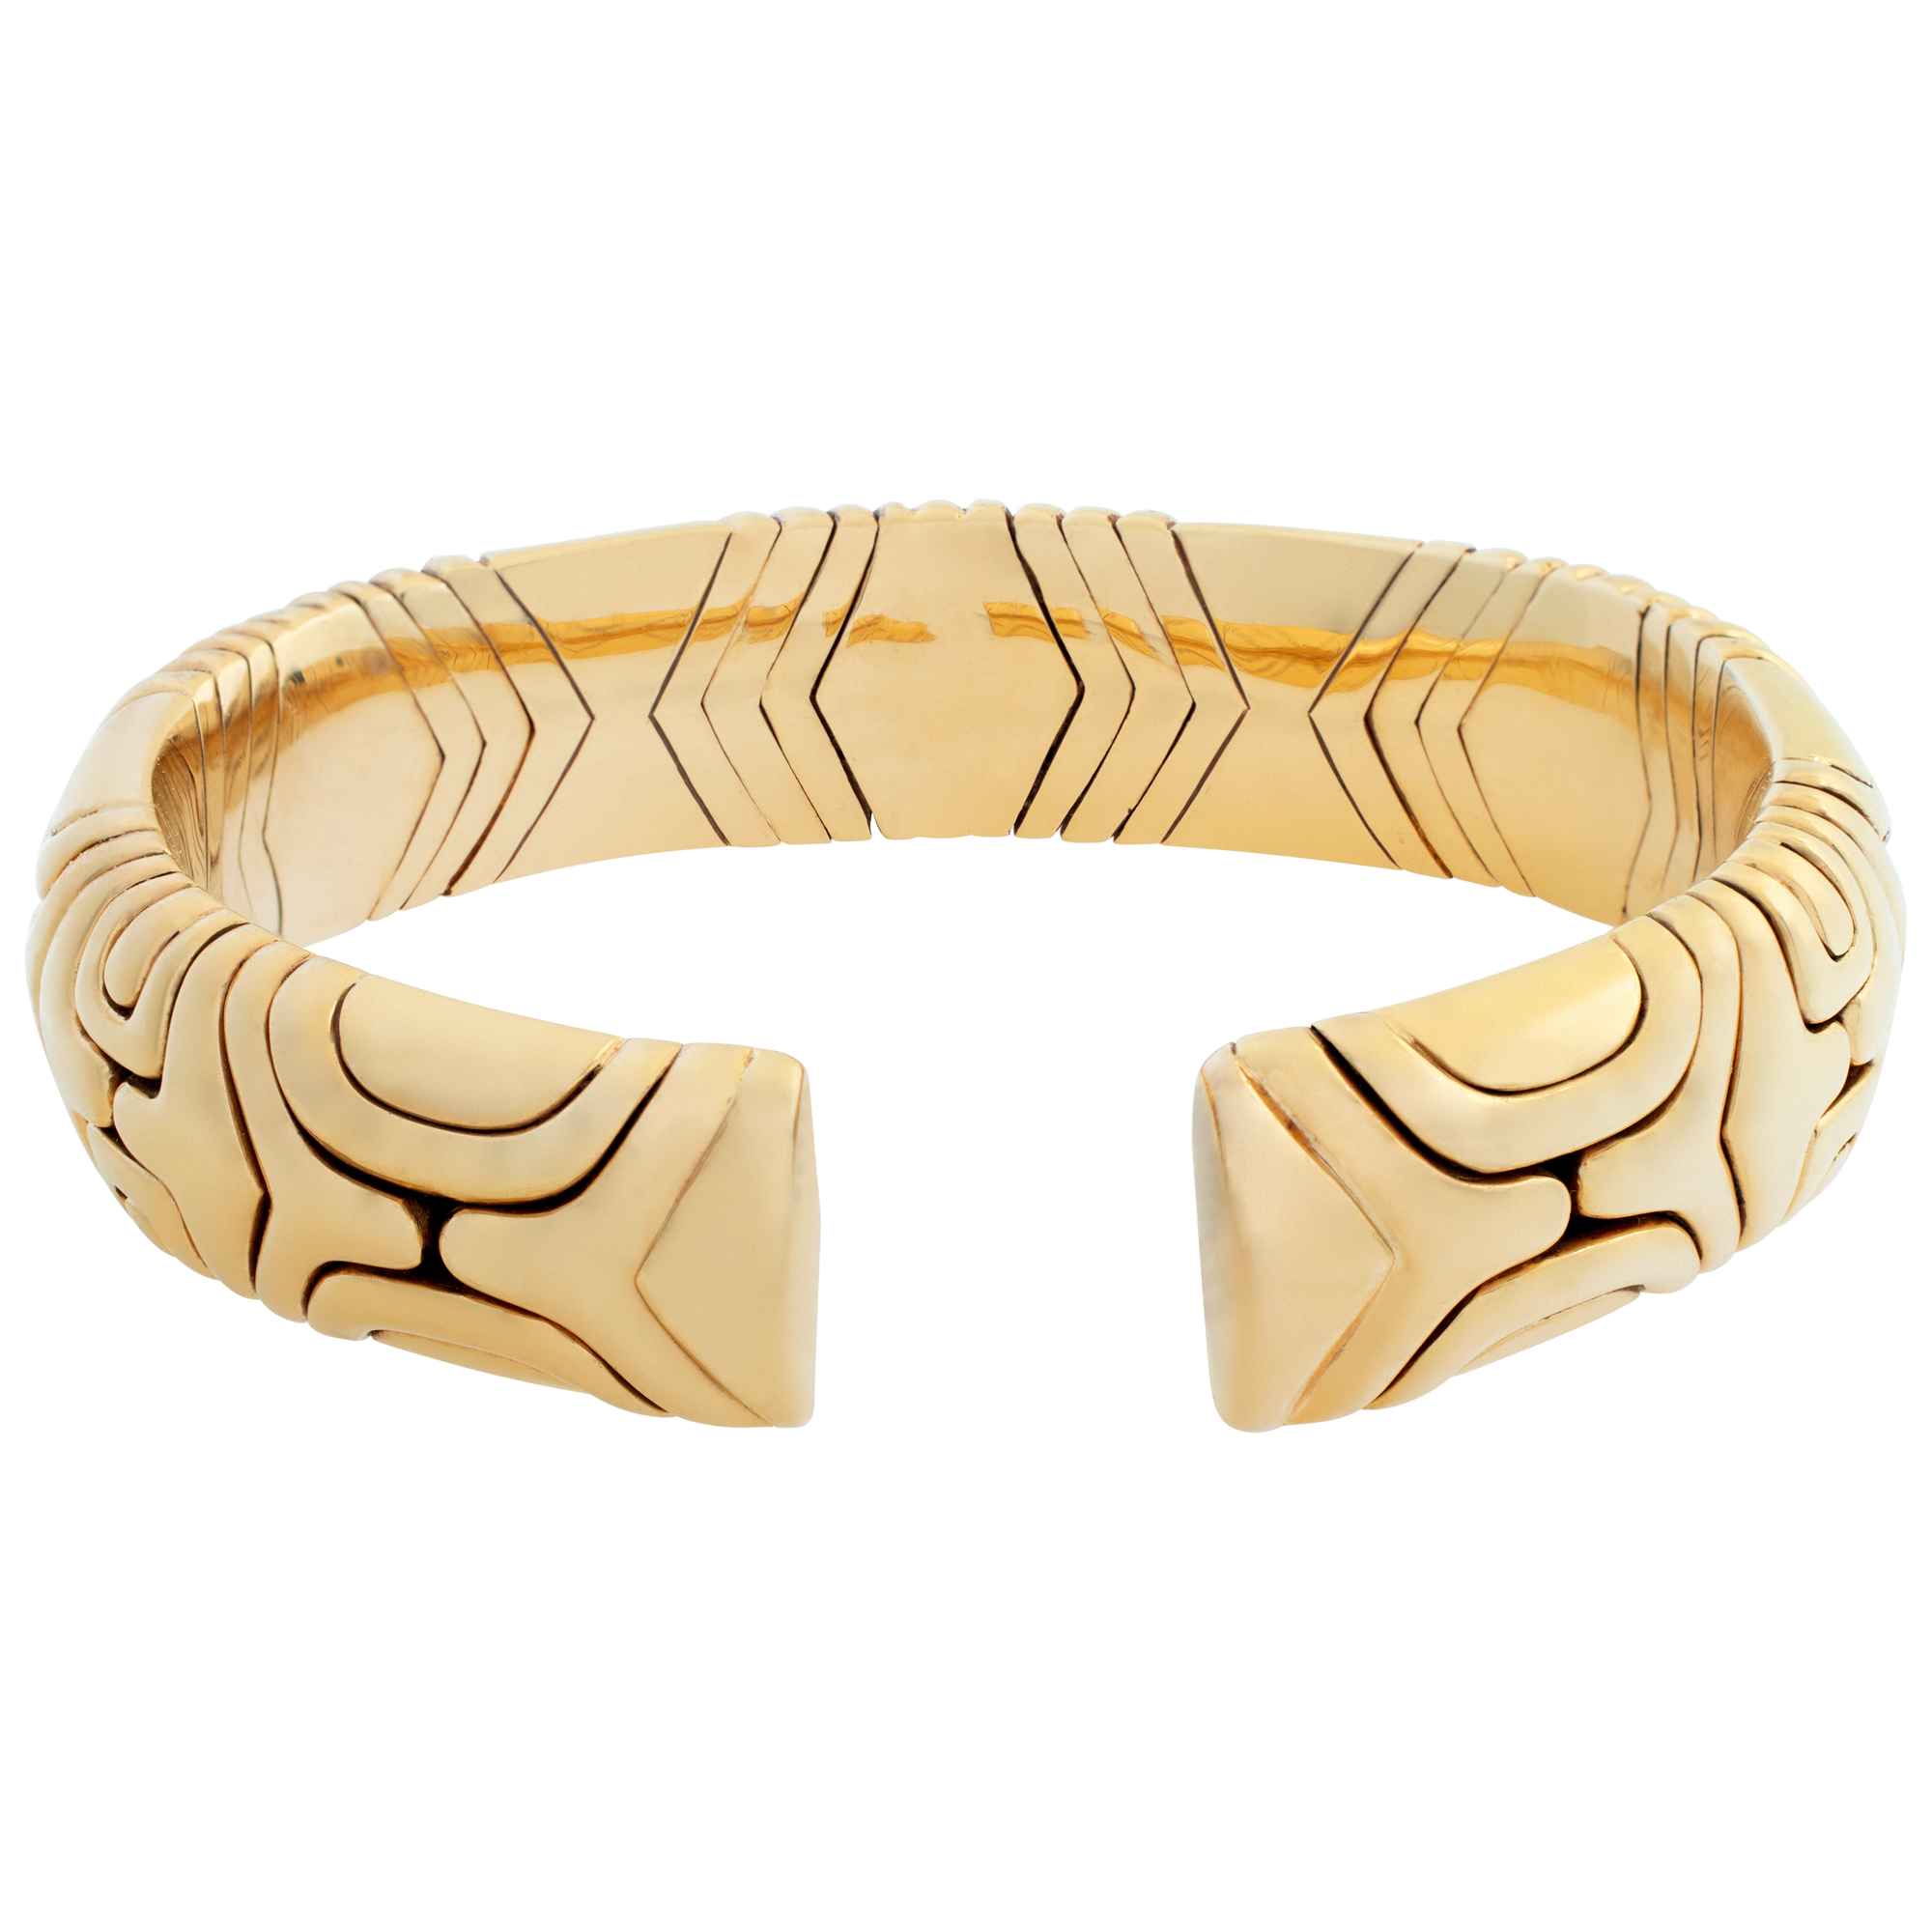 Vintage Bvlgari Alveare bracelet cuff bangle in 18Kt yellow gold. Made in italy 1989 image 3